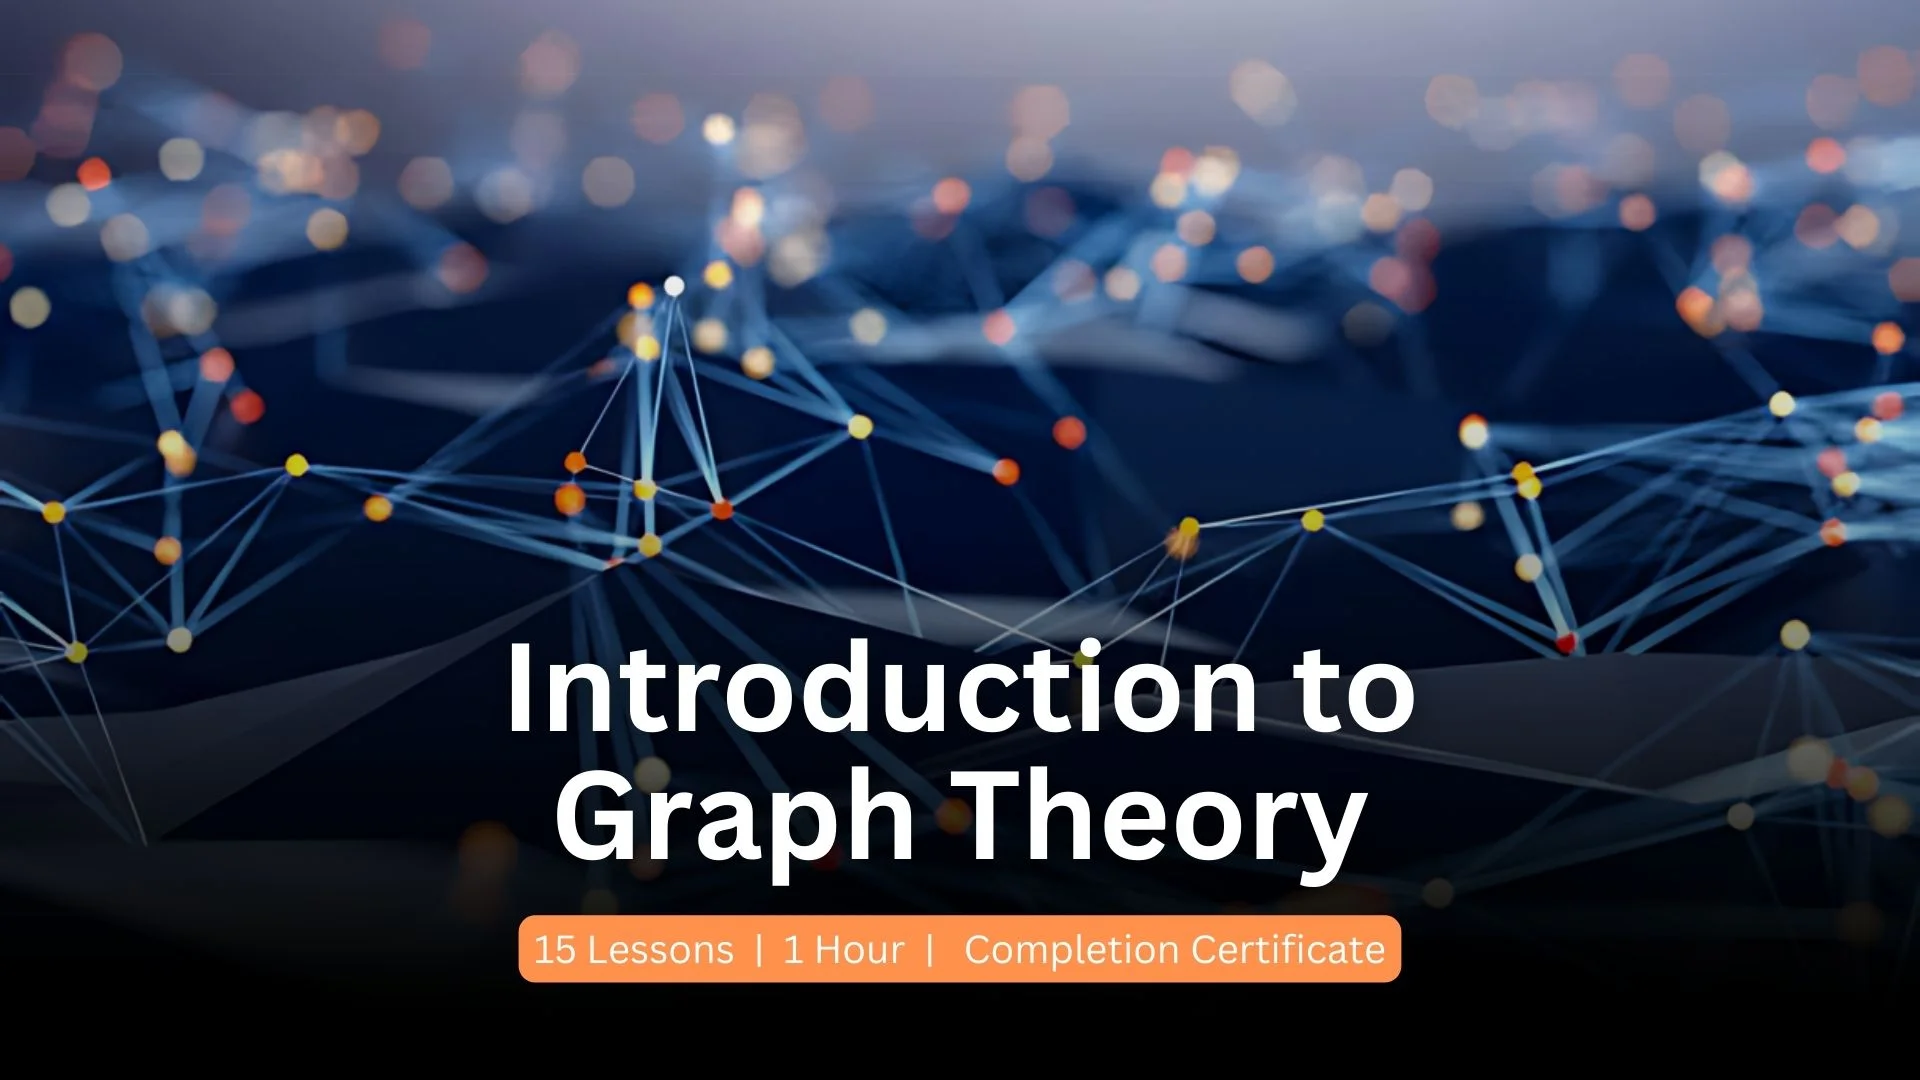 Introduction to Graph Theory Course Image